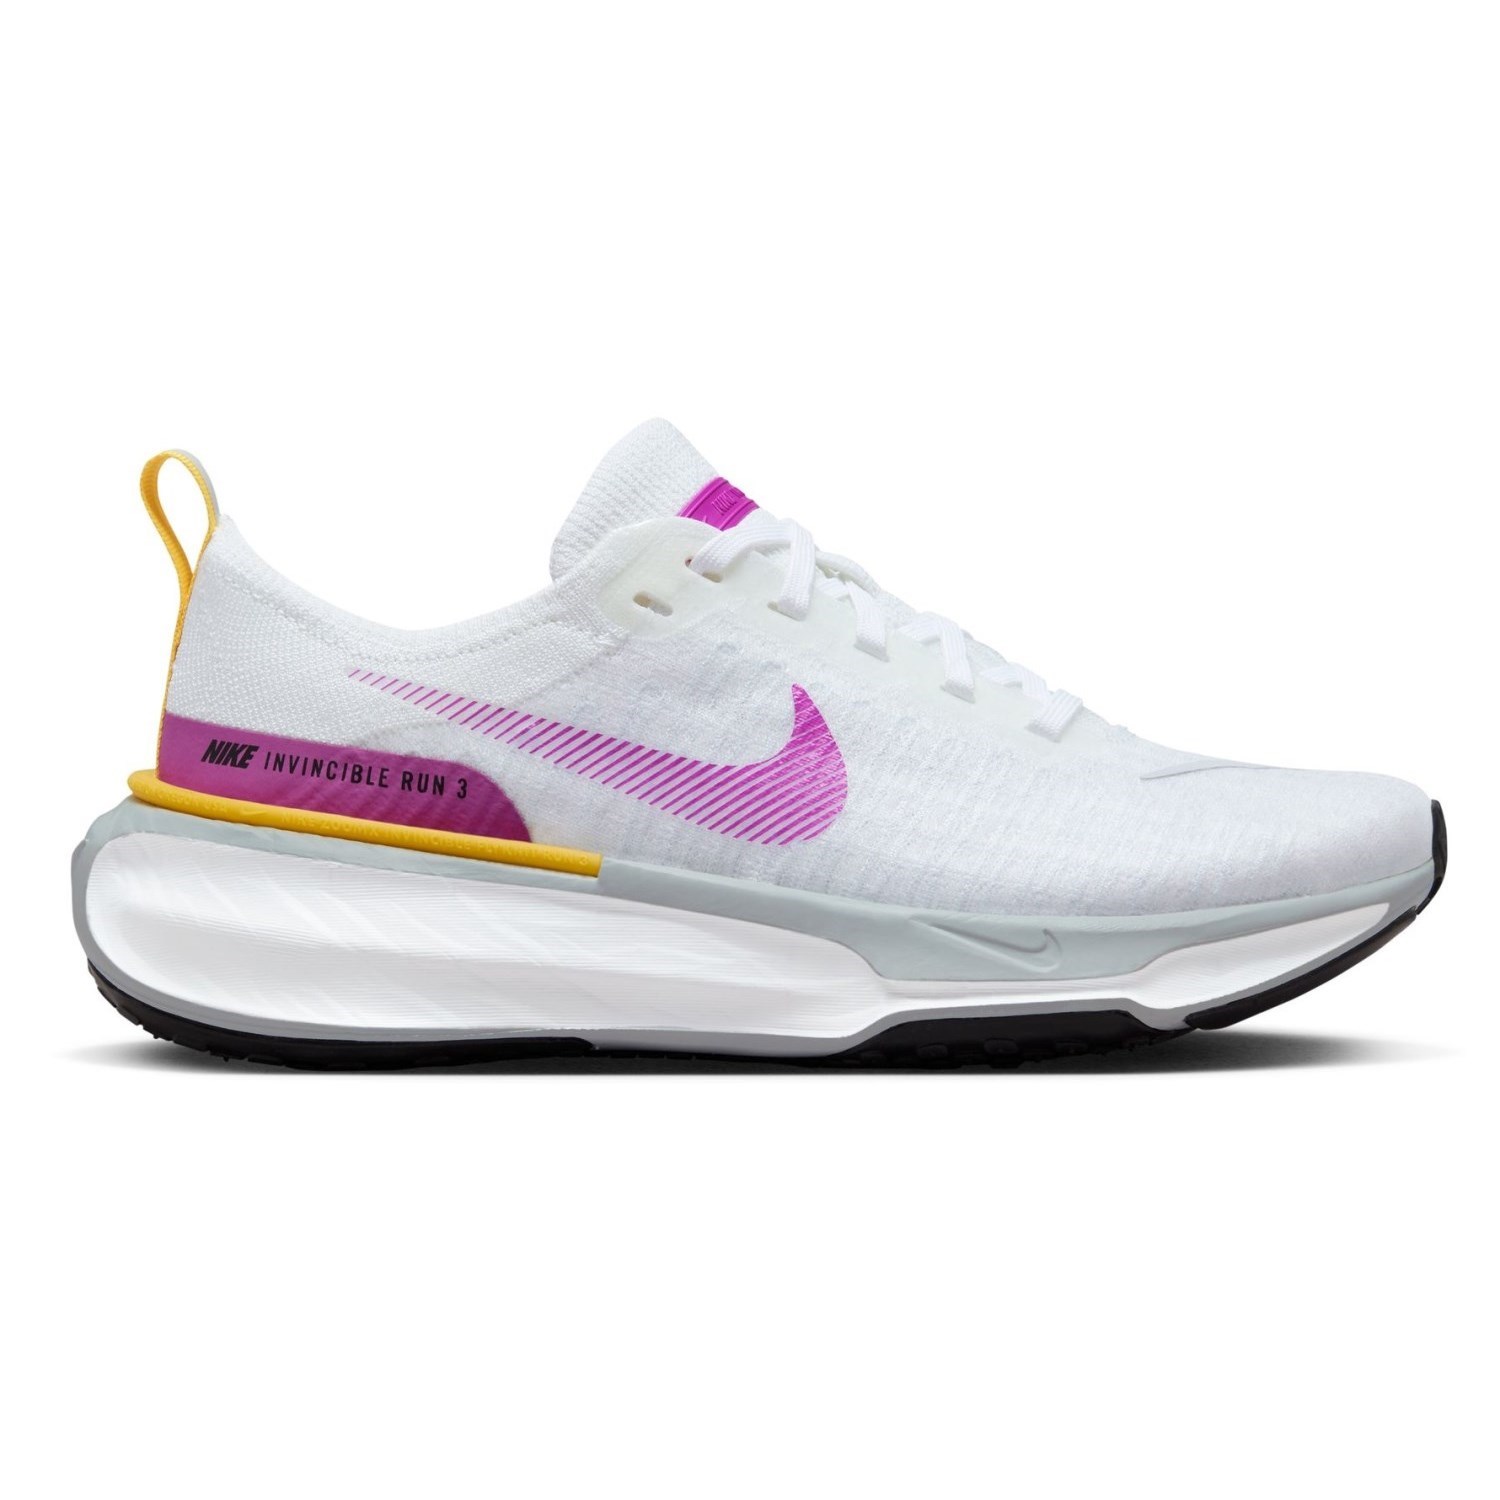 Nike ZoomX Invincible Run Flyknit 3 - Womens Running Shoes - White ...